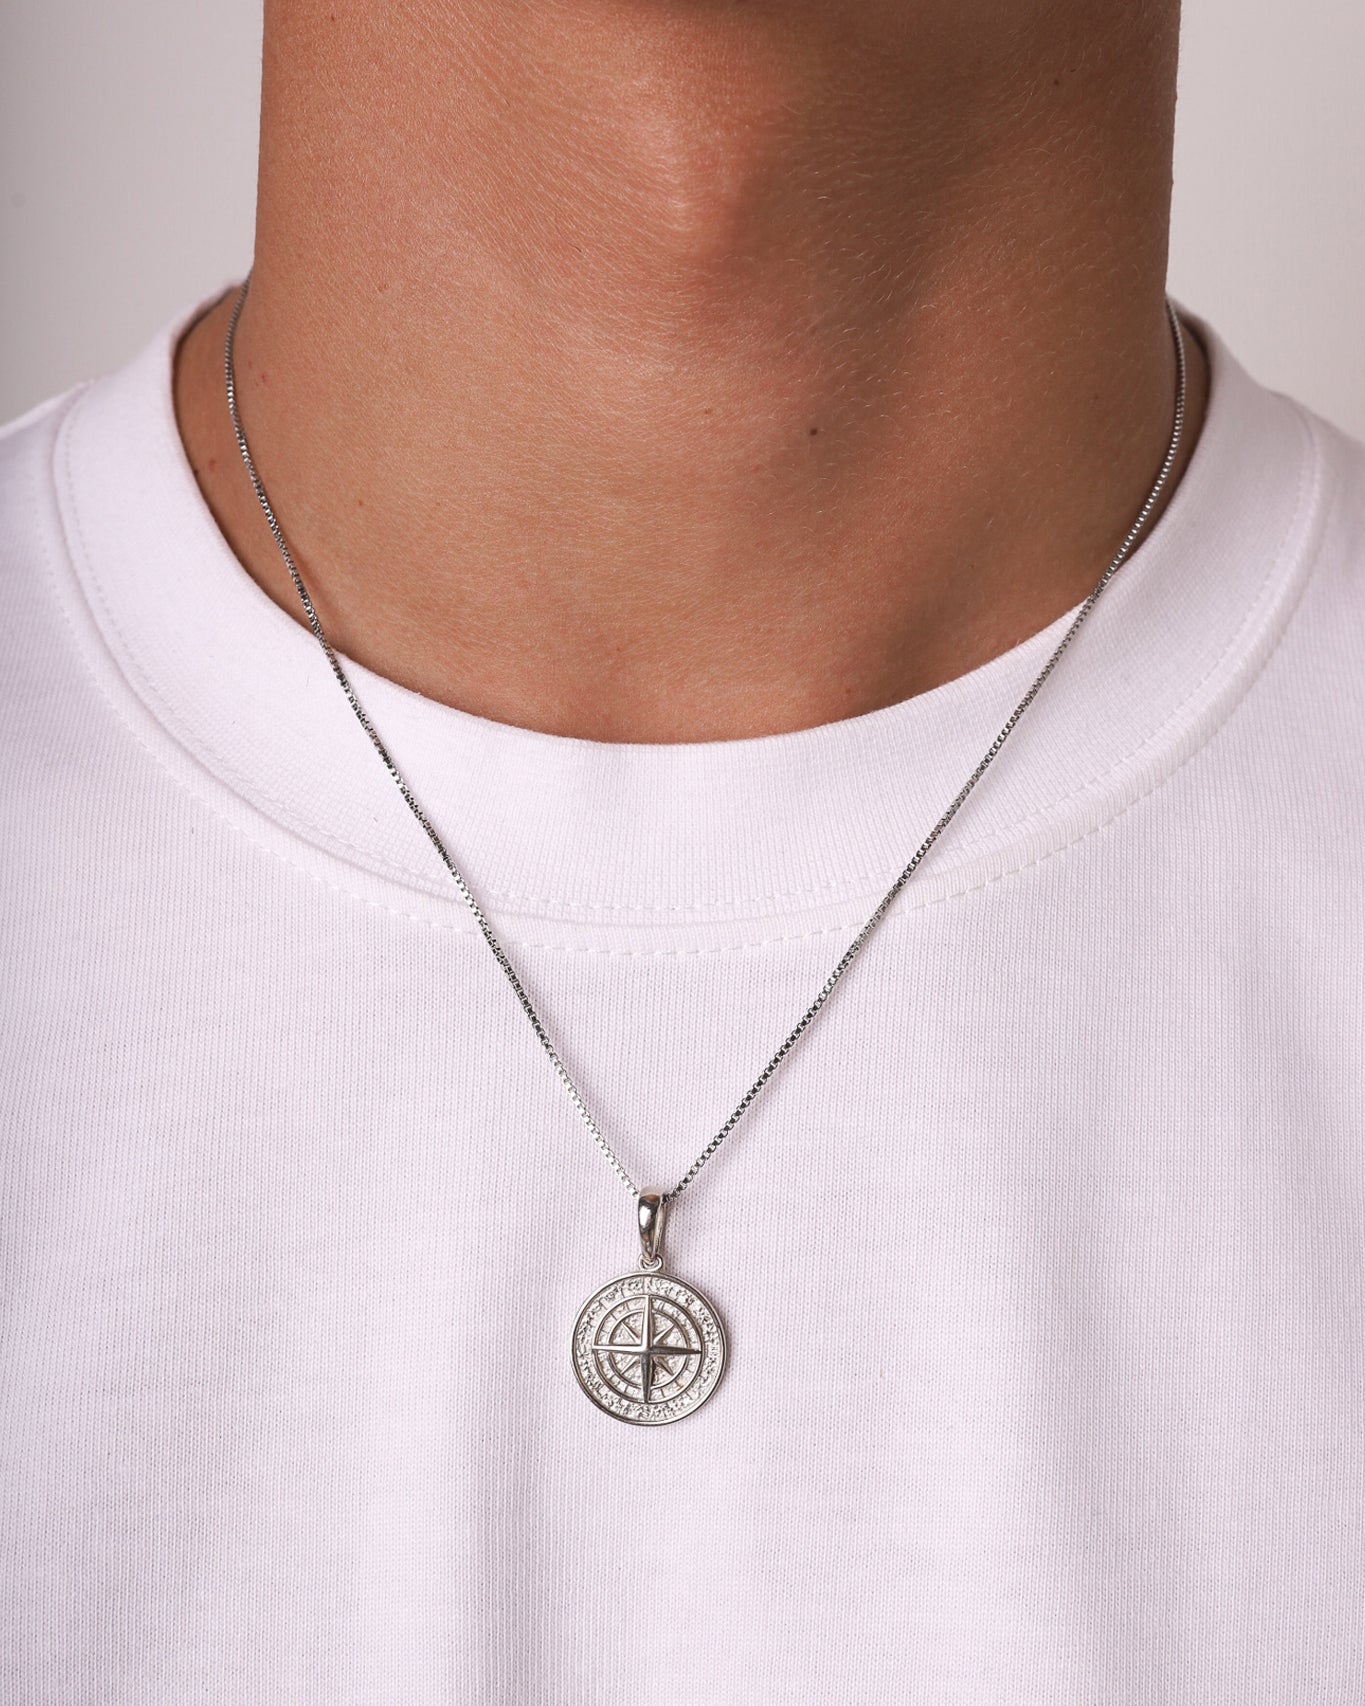 CLEAN COMPASS PENDANT 925. - WHITE GOLD